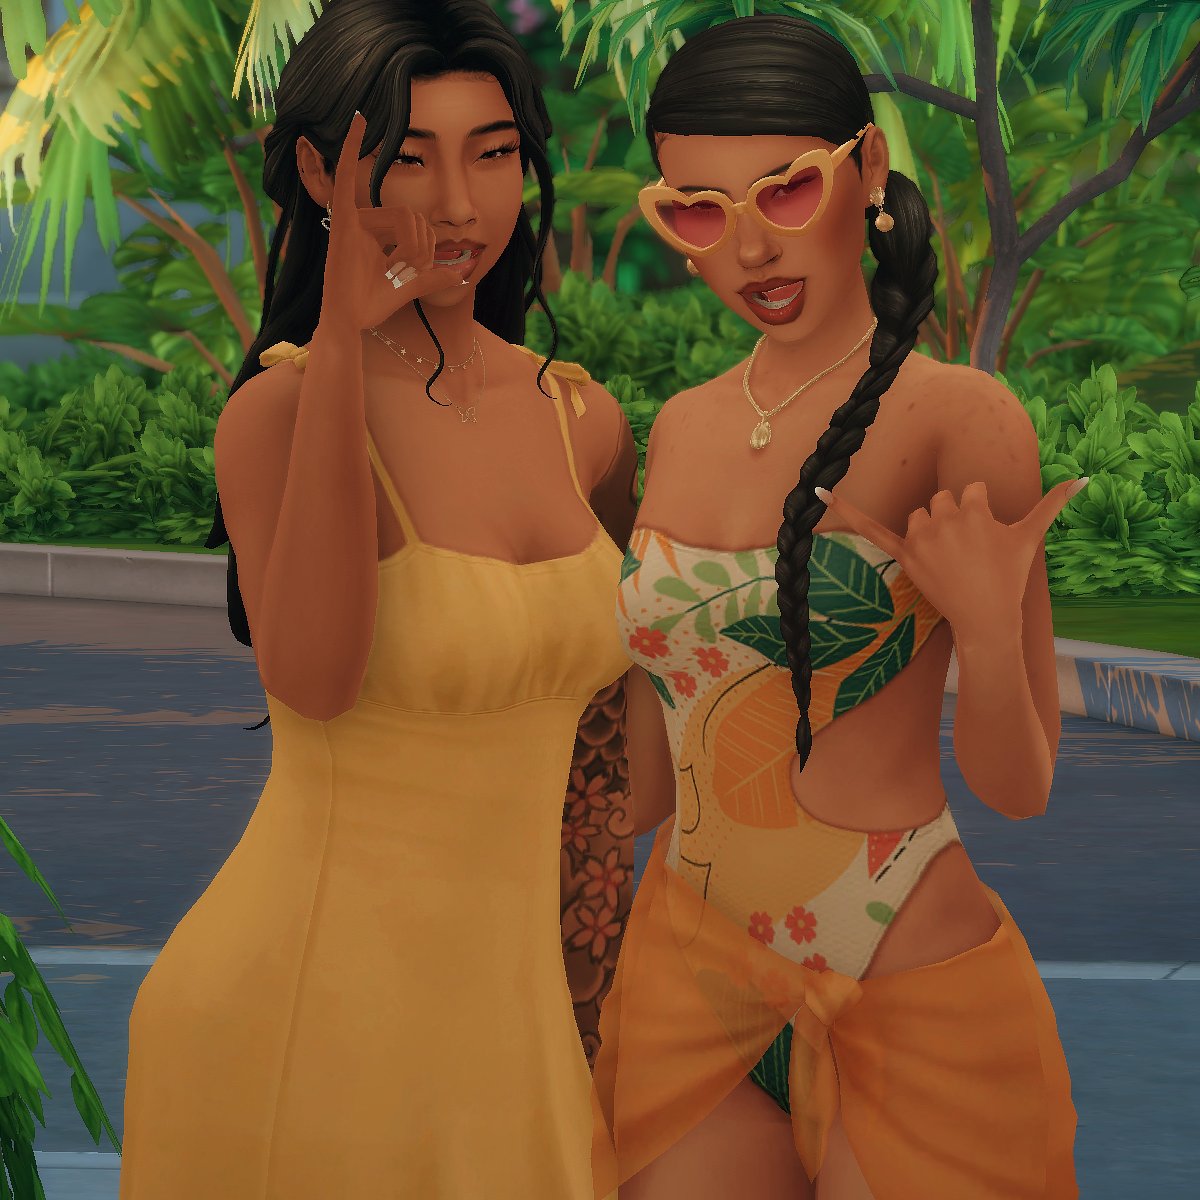 Kiri brought her daughter to Tomarang to show her how she gets down in her home country 🤭

#TheSims4
#ShowUsYourSims